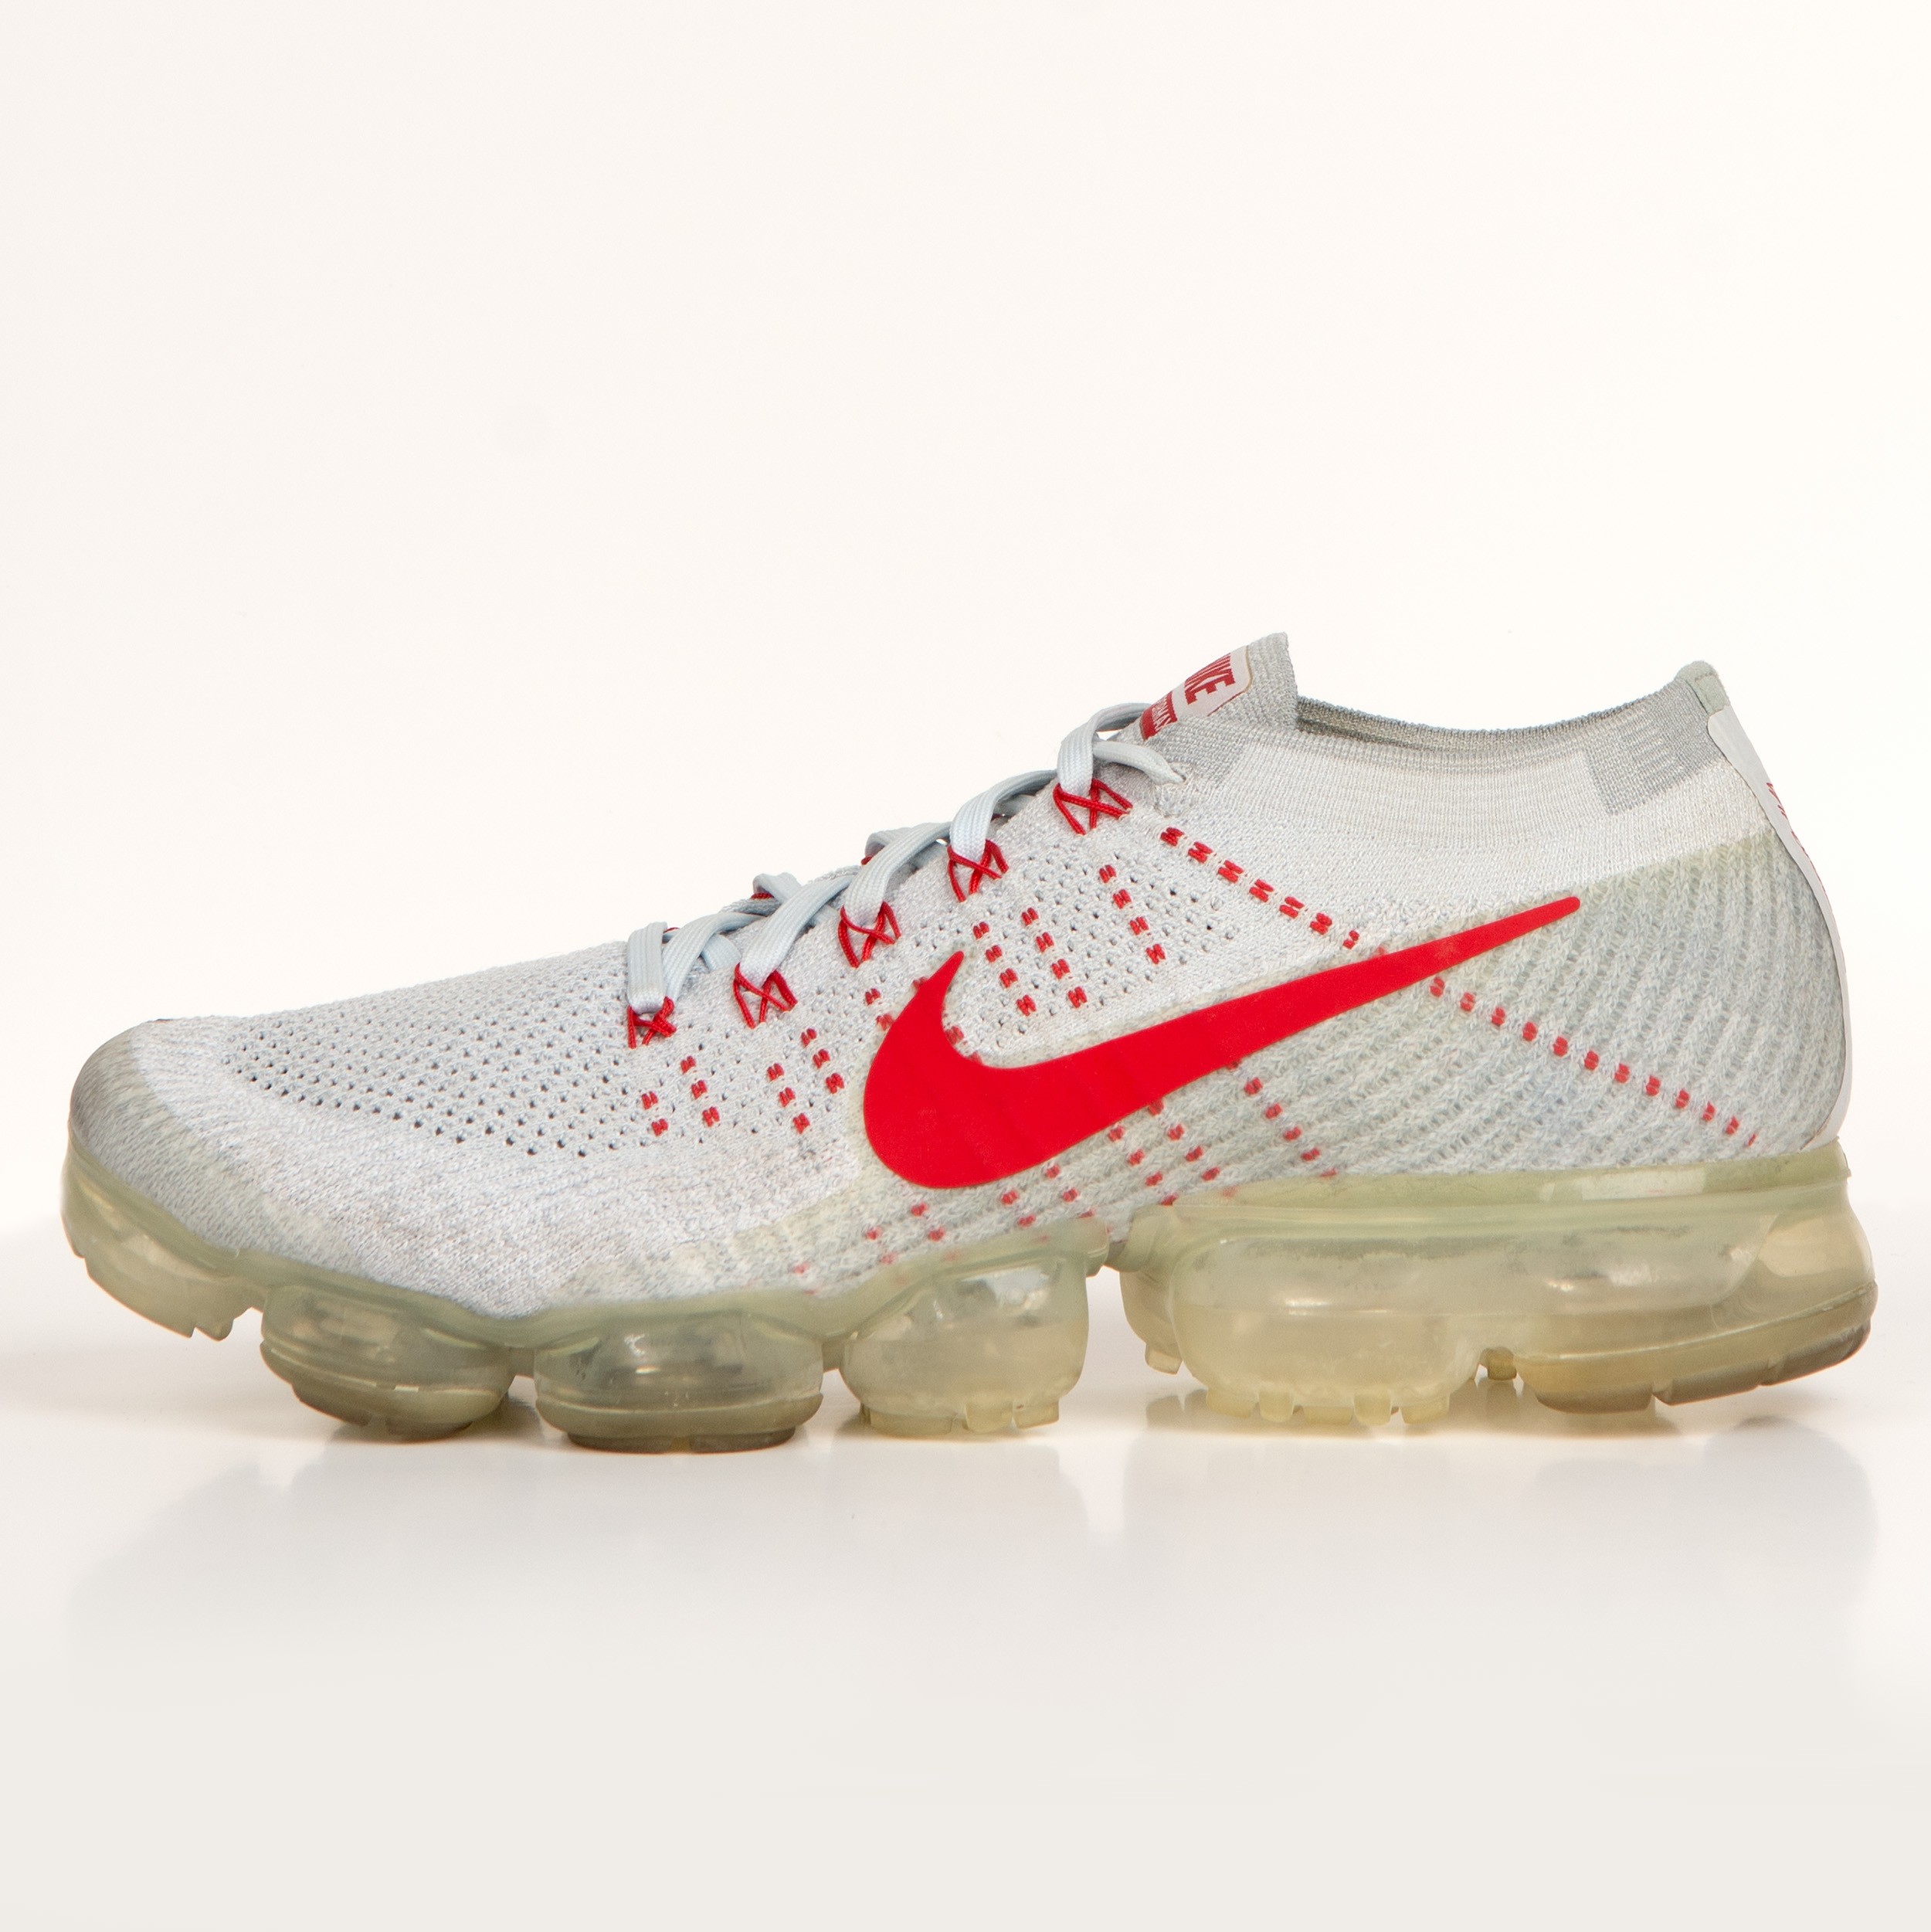 RE-POCKETS NIKE TRAINERS VAPORMAX BUBBLE SOLE WHITE/RED